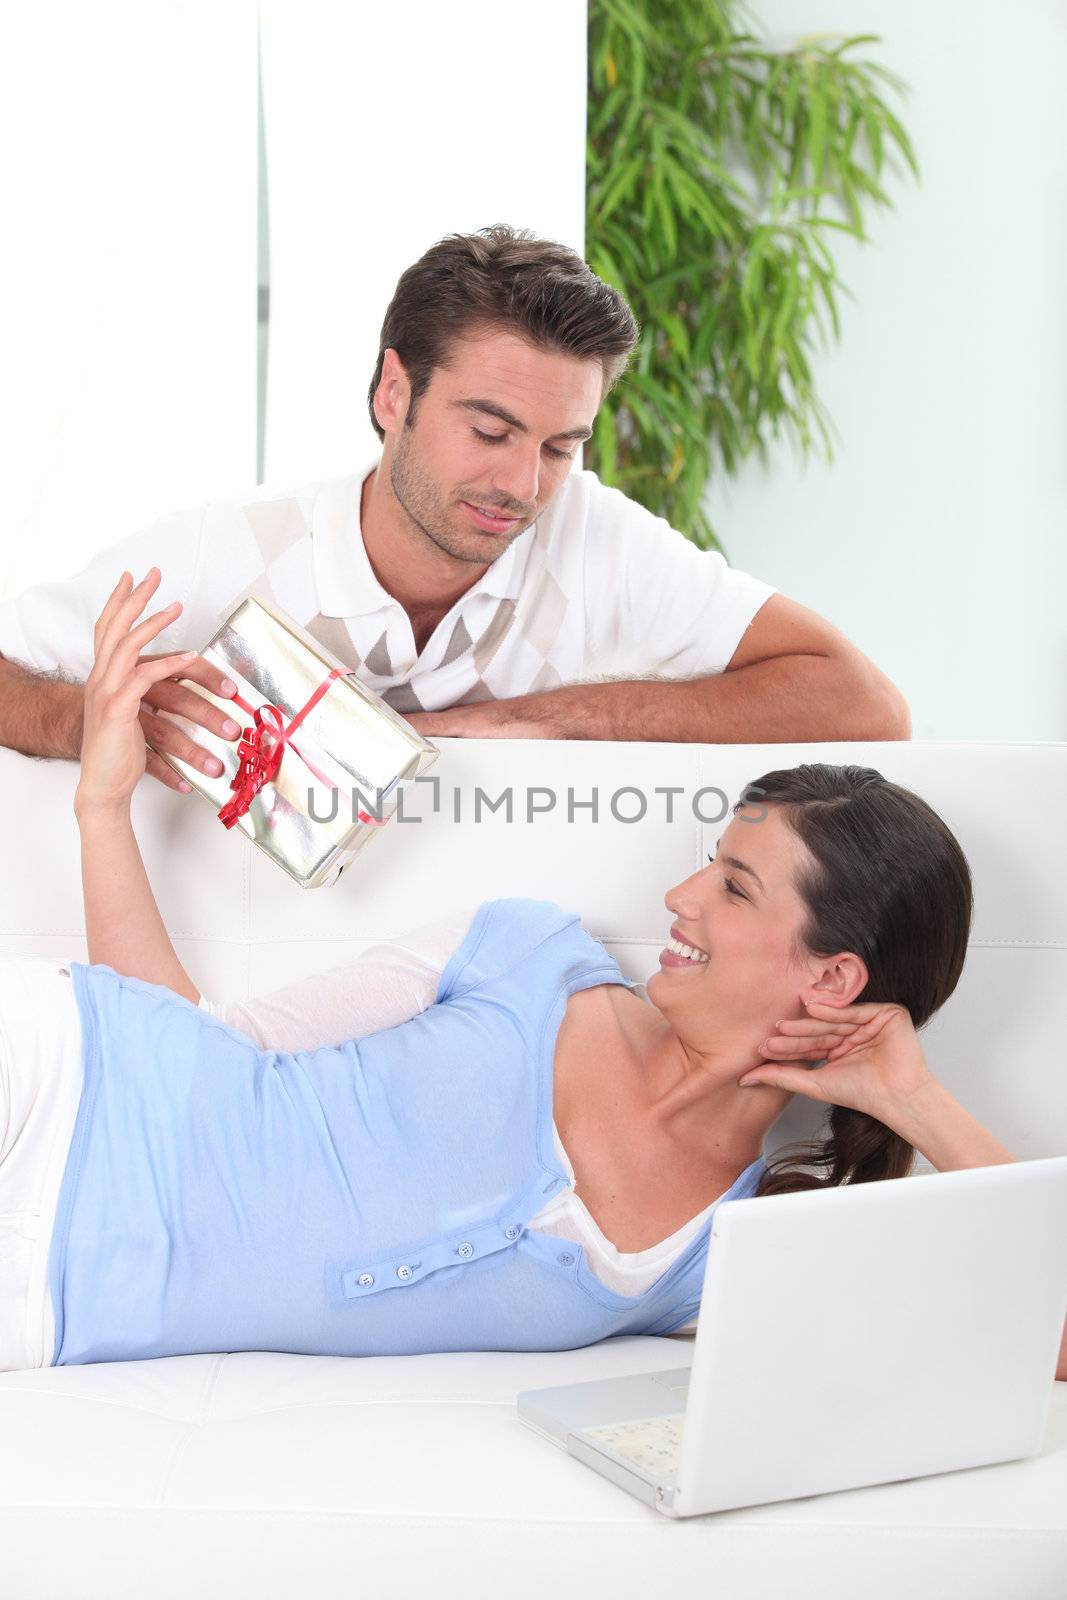 Boyfriend offering gift to girl by phovoir